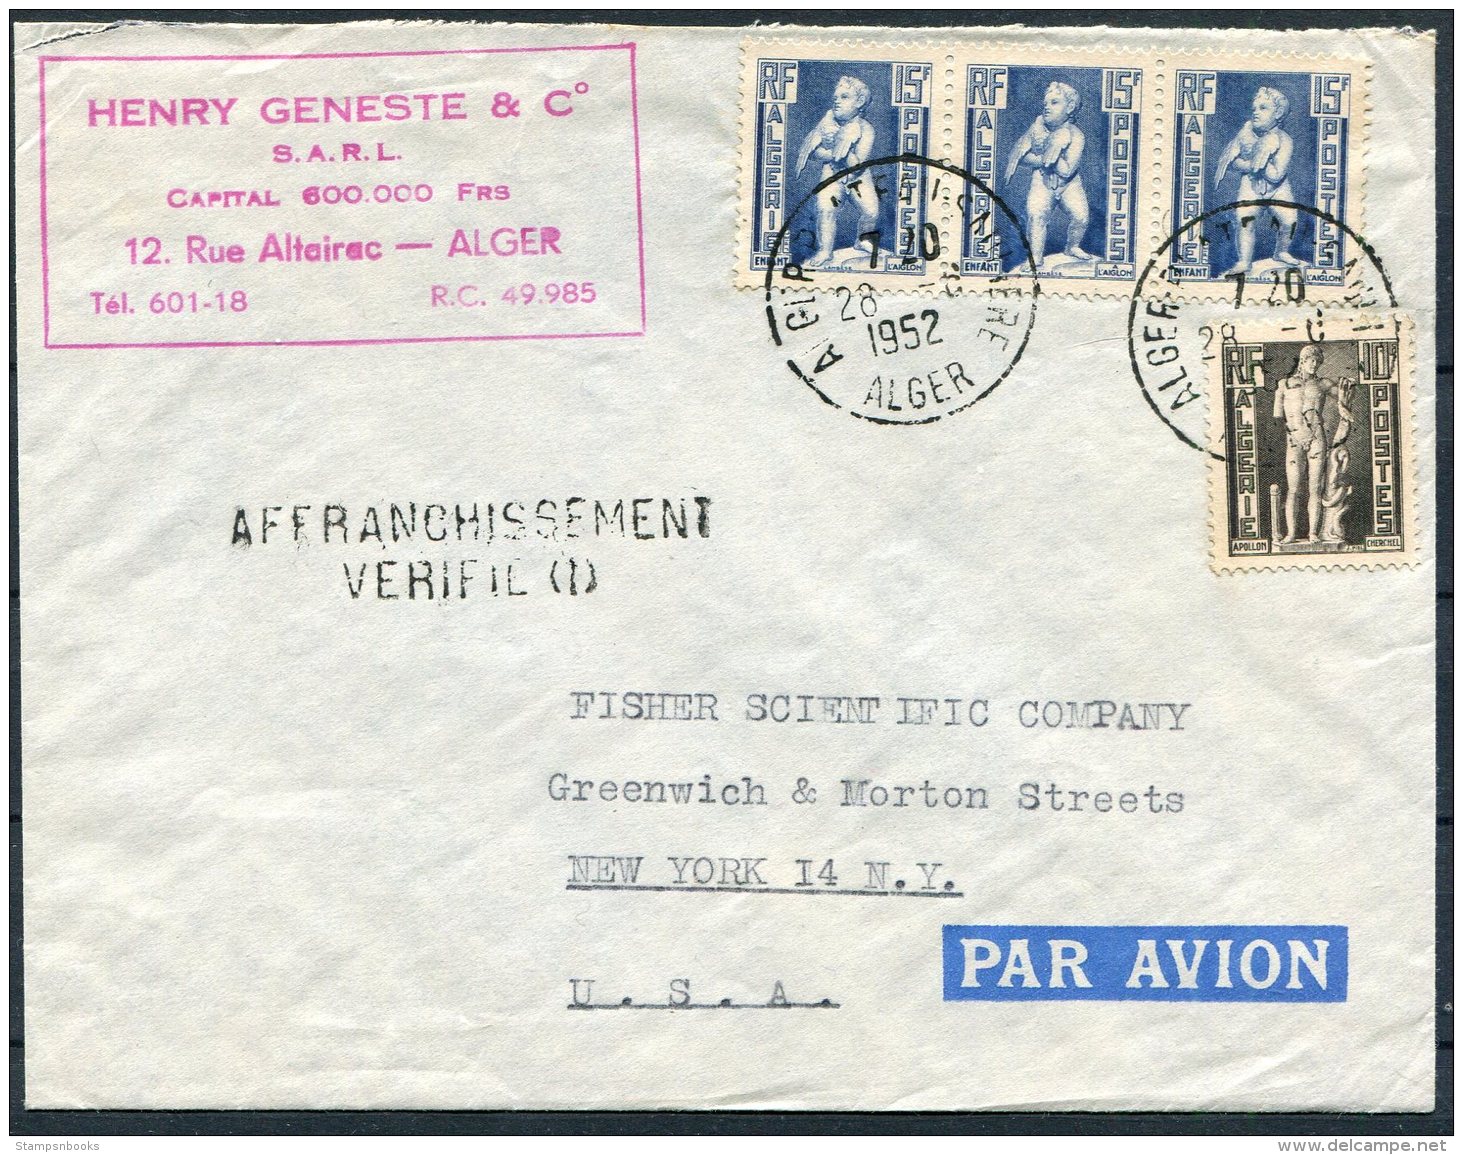 1952 Algeria Airmail Cover Heny Geneste &amp; Co , Alger - Fisher Scientific, New York USA. Affranchissement Verifid - Covers & Documents